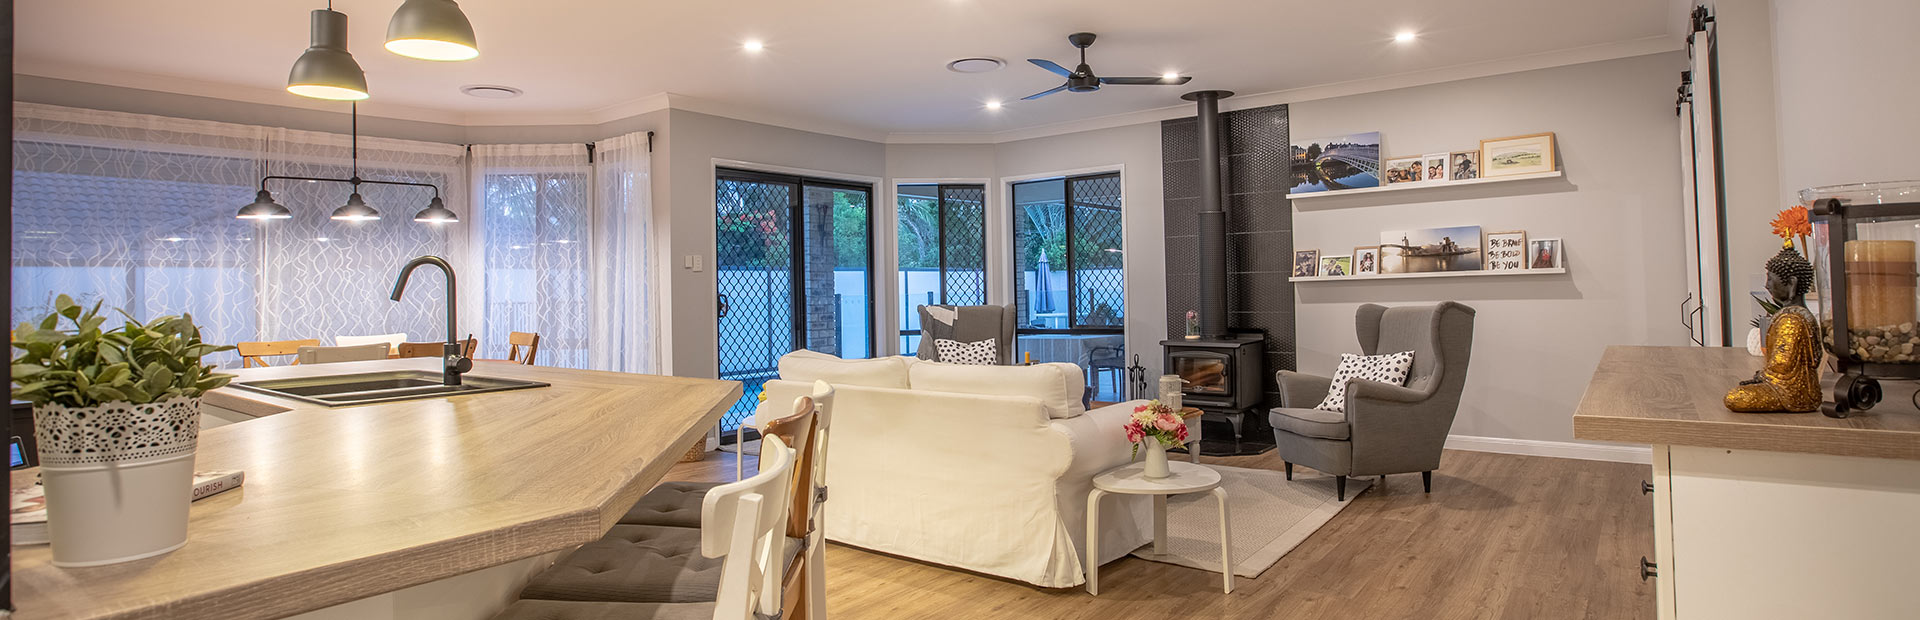 Renovare-Chermside-North-Lakes-Full-Home-Renovation-completed-feature2